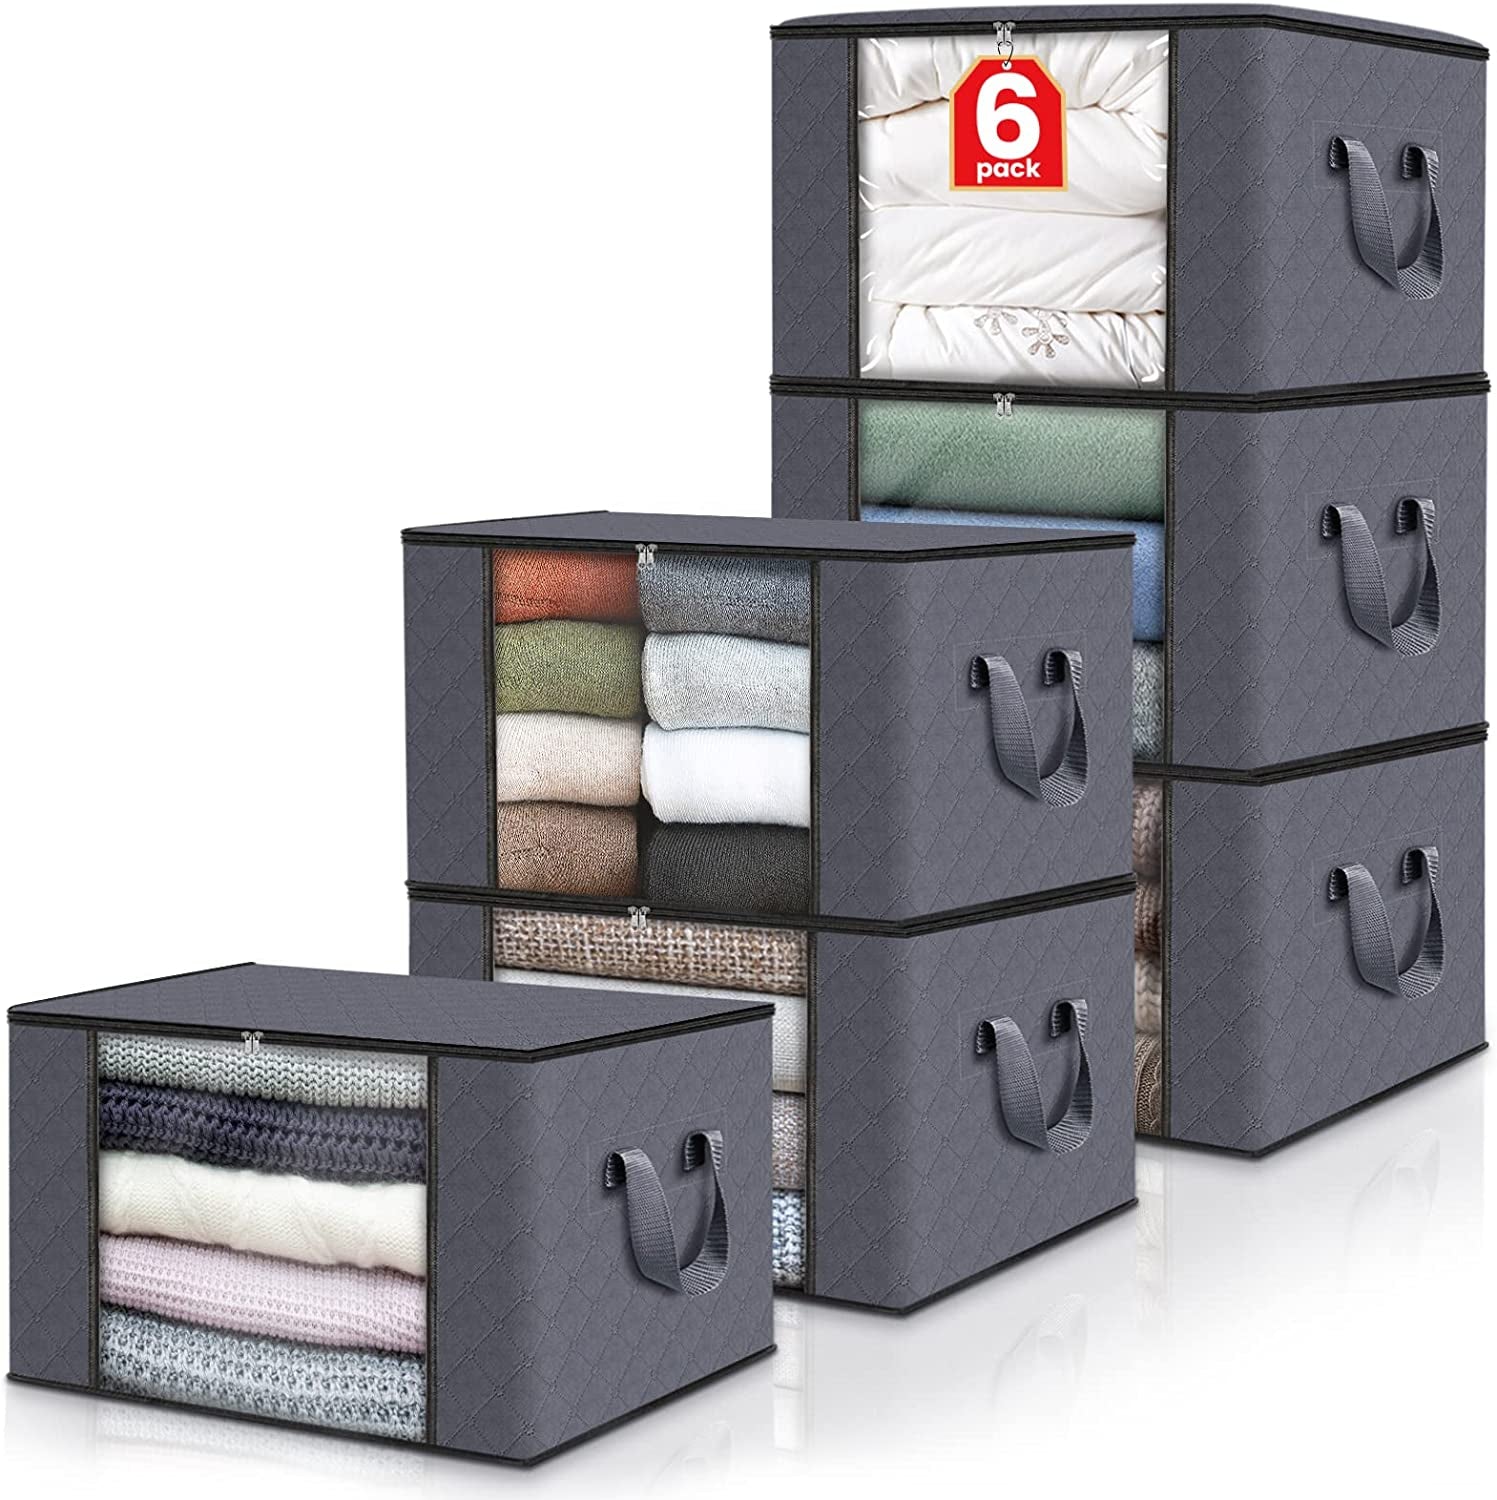  Storage Containers for Organizing Bedroom